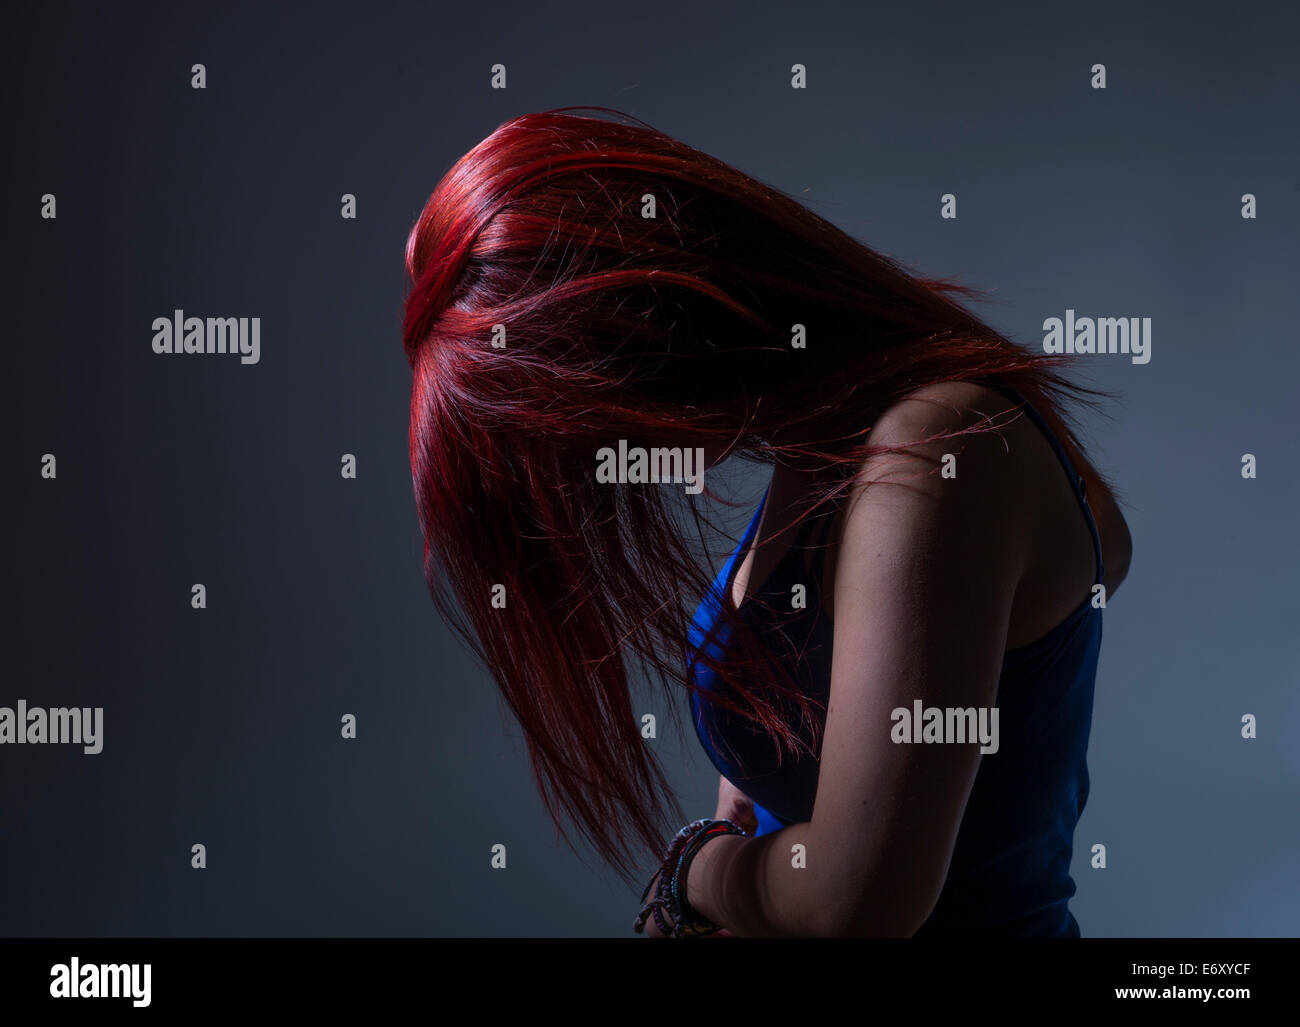 Sadness / Depression:  A young woman teenage girl in profile with dyed bright red hair, head bowed obscuring her face, UK Stock Photo